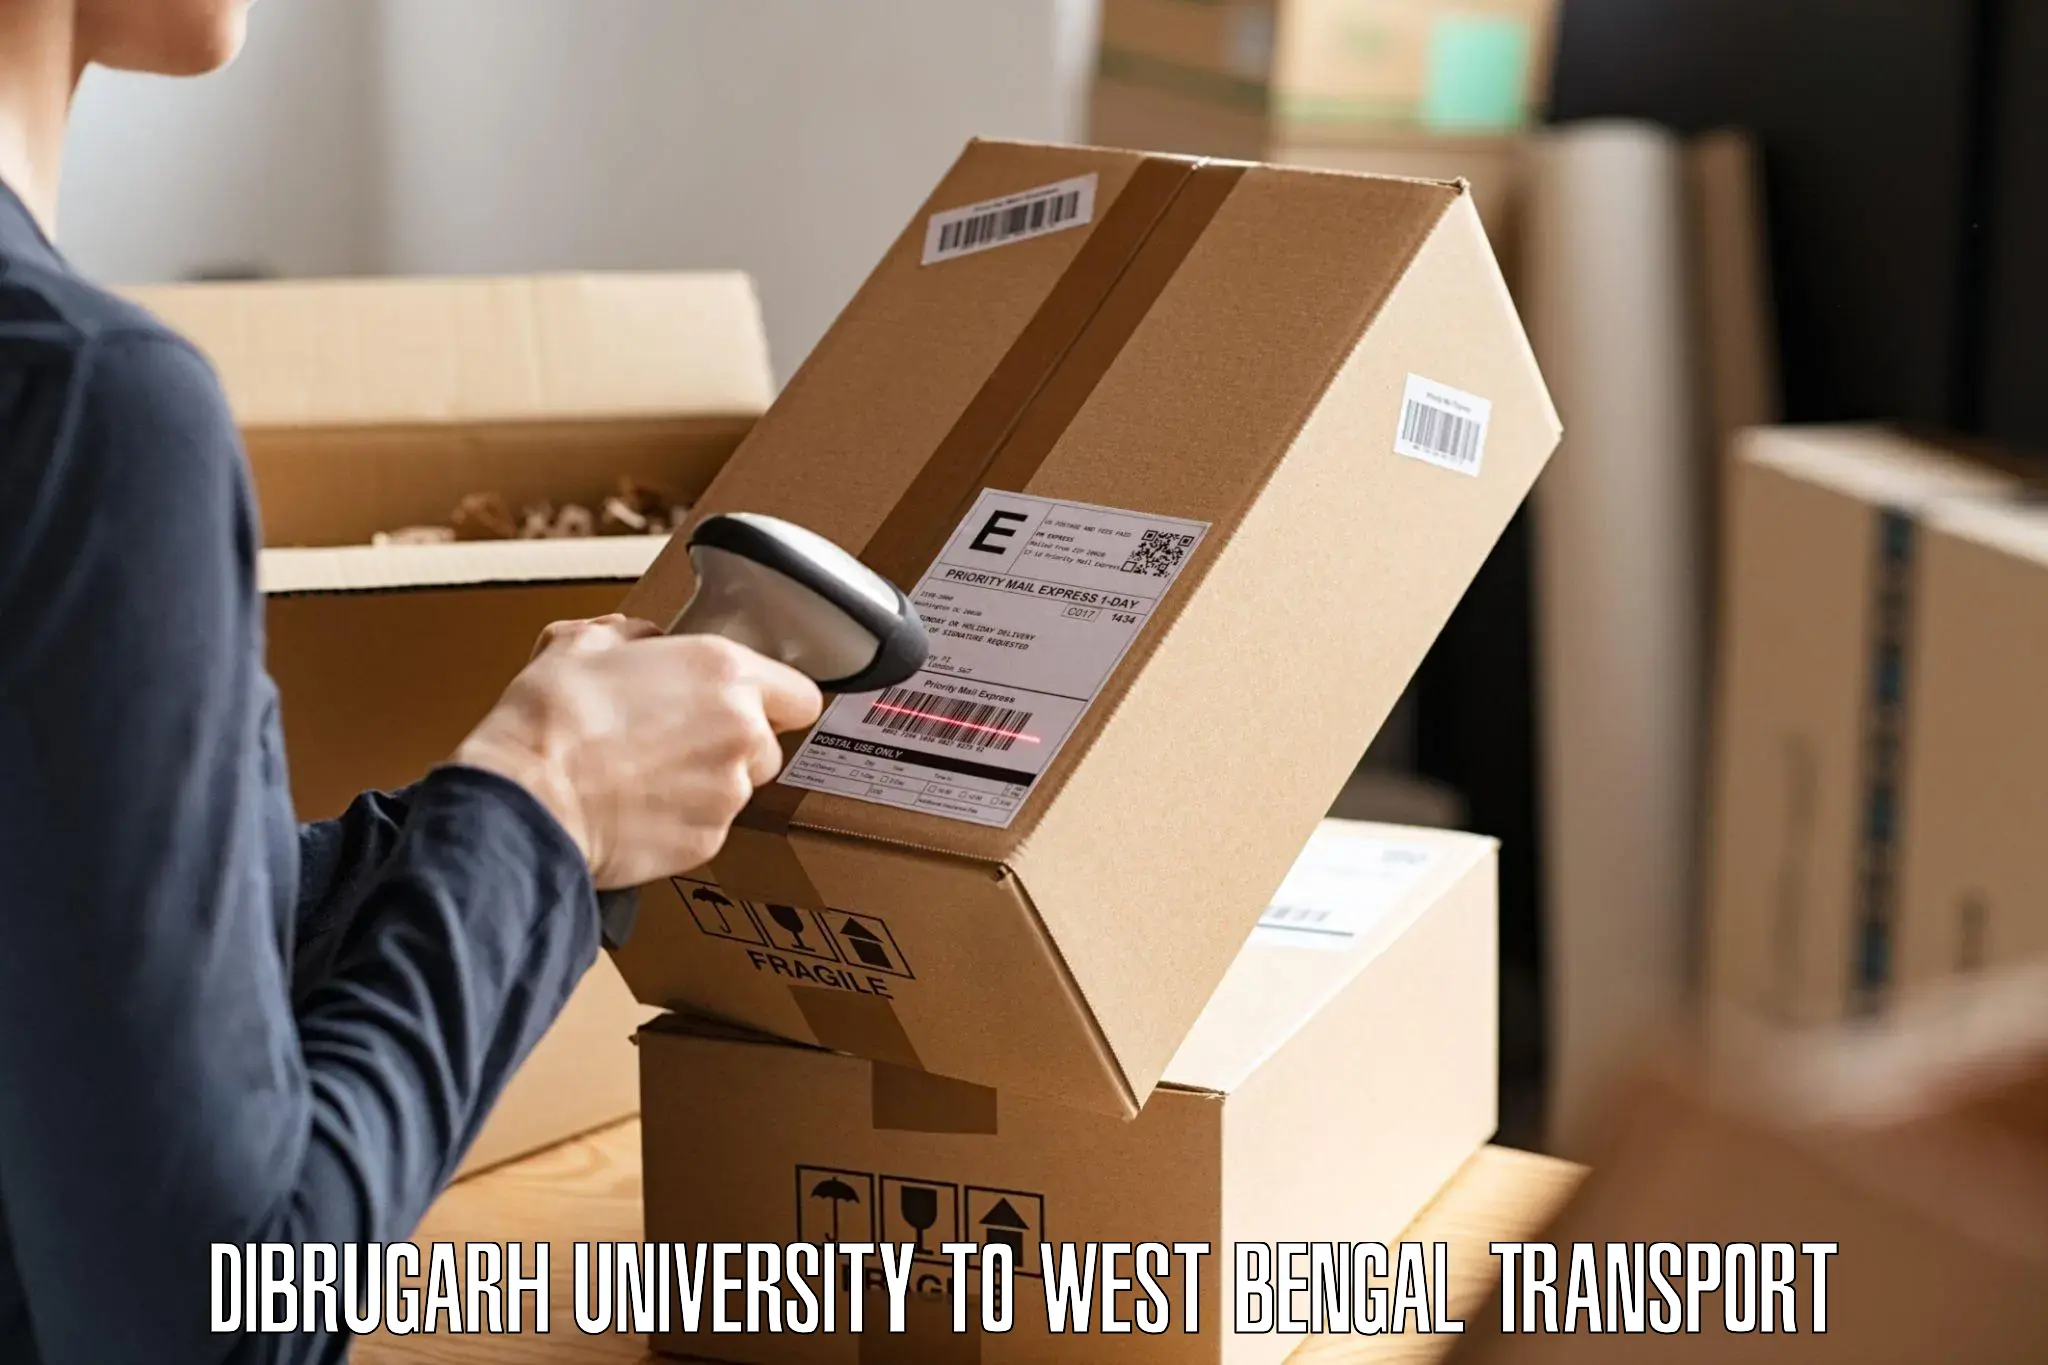 Daily parcel service transport in Dibrugarh University to Mirzapur Bardhaman